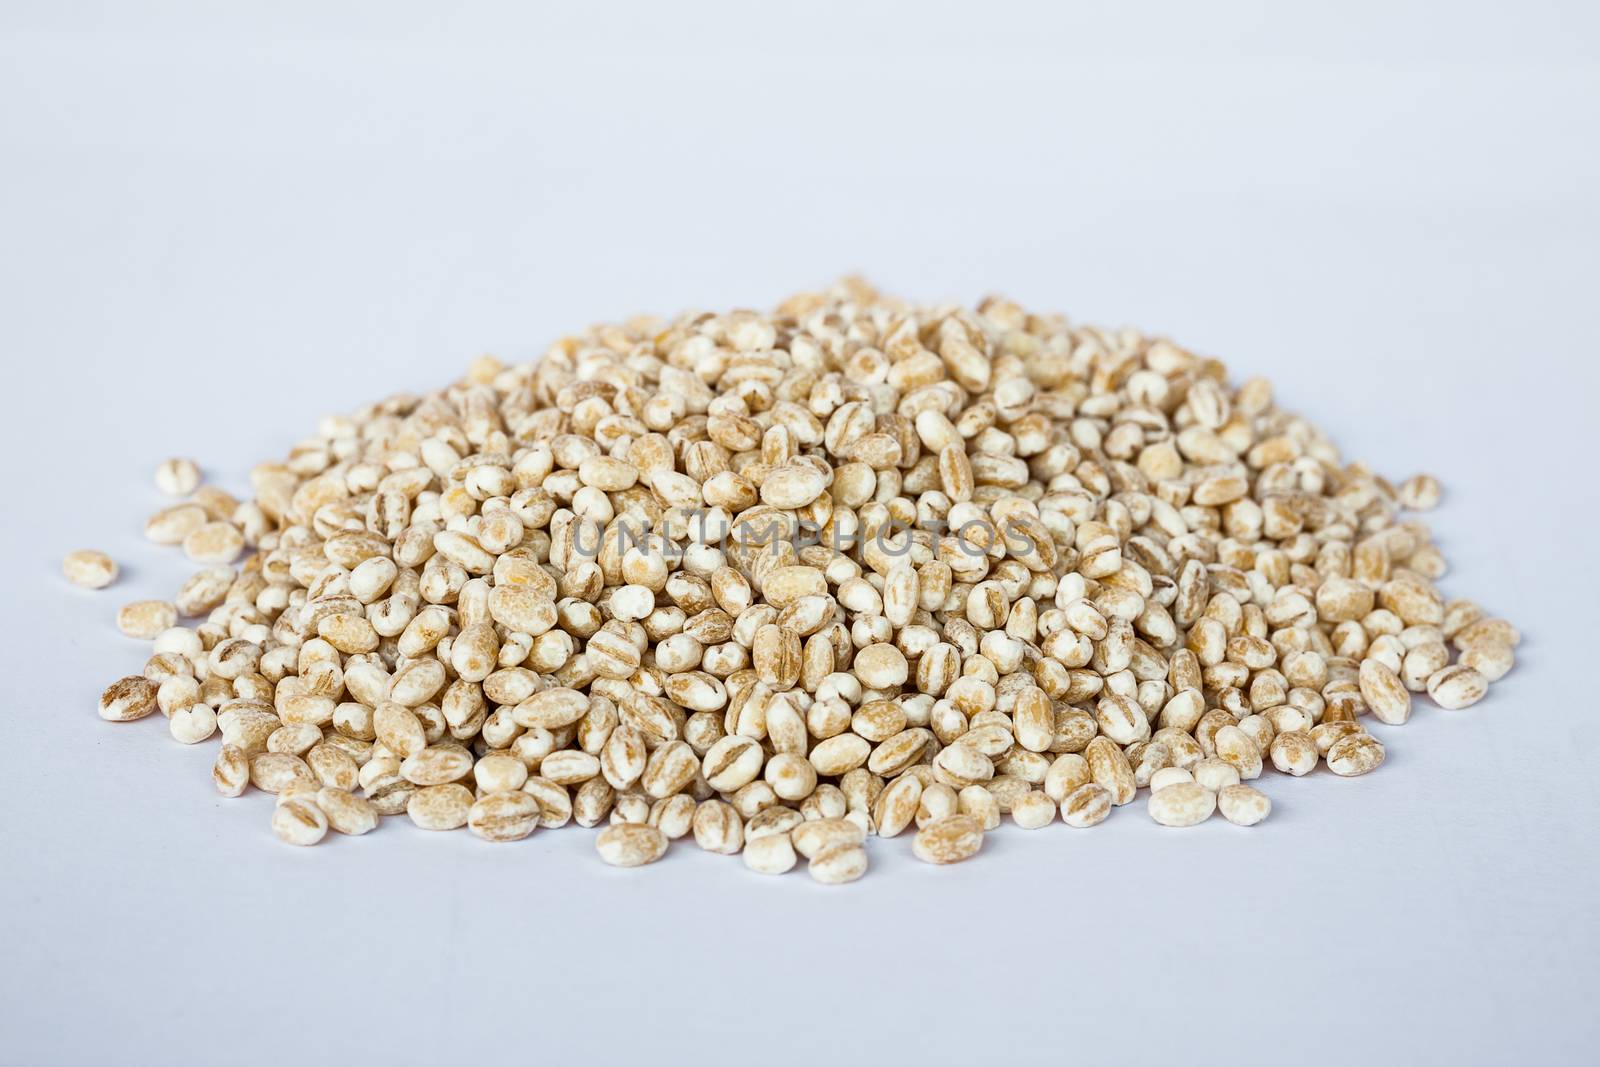 Dry bean and nut on white background